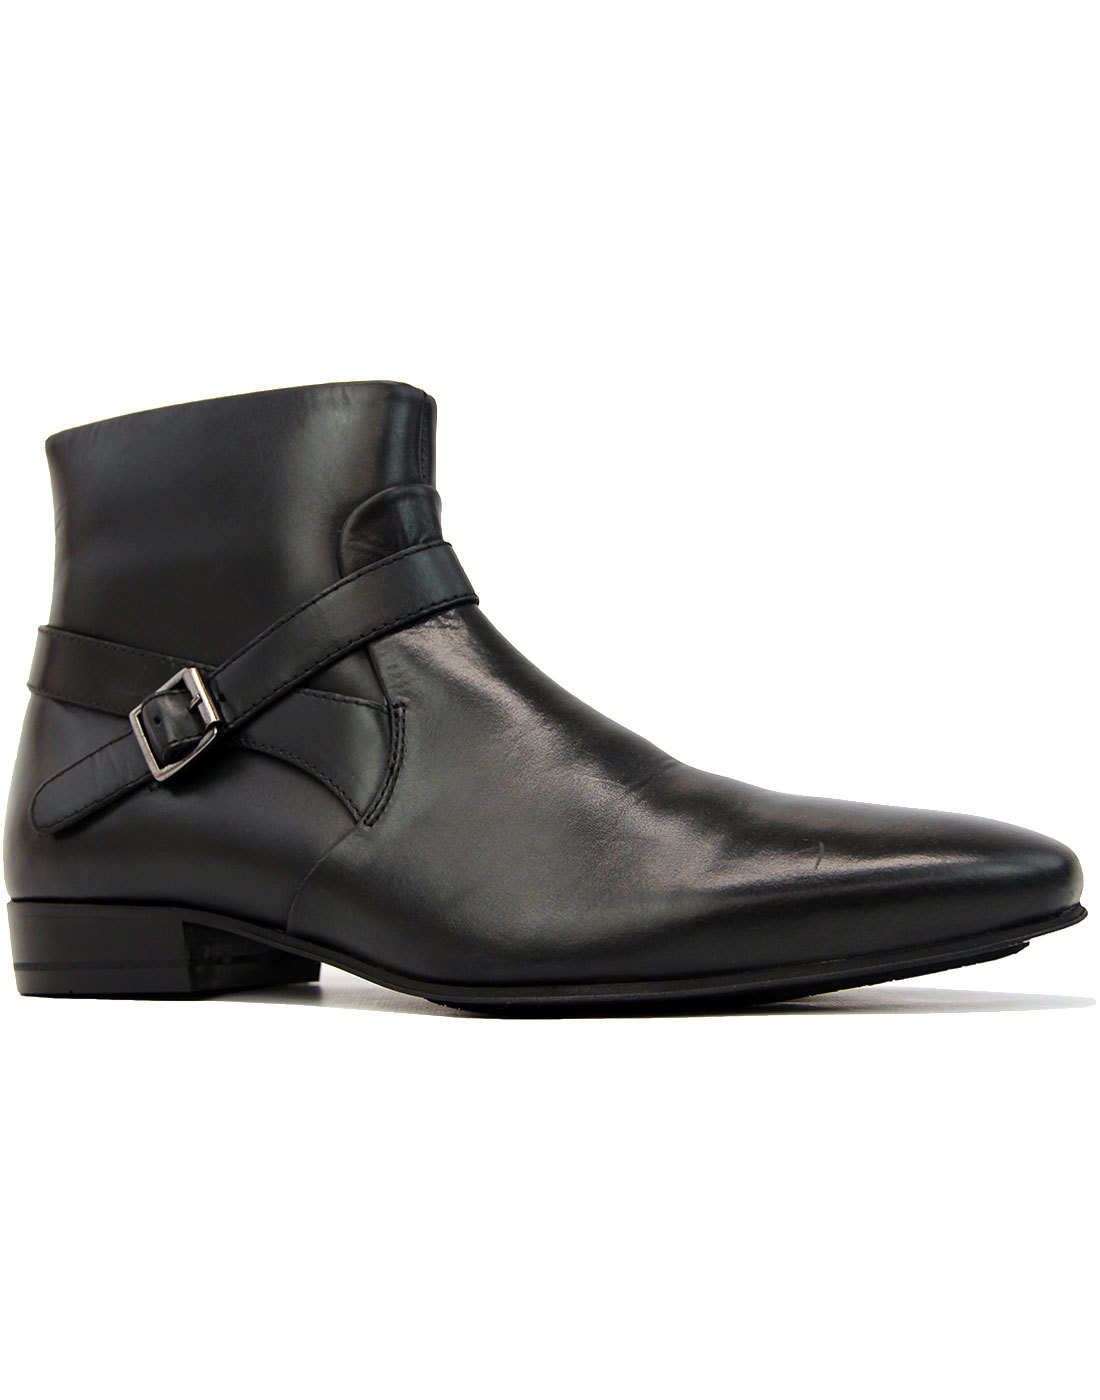 h by hudson mens chelsea boots